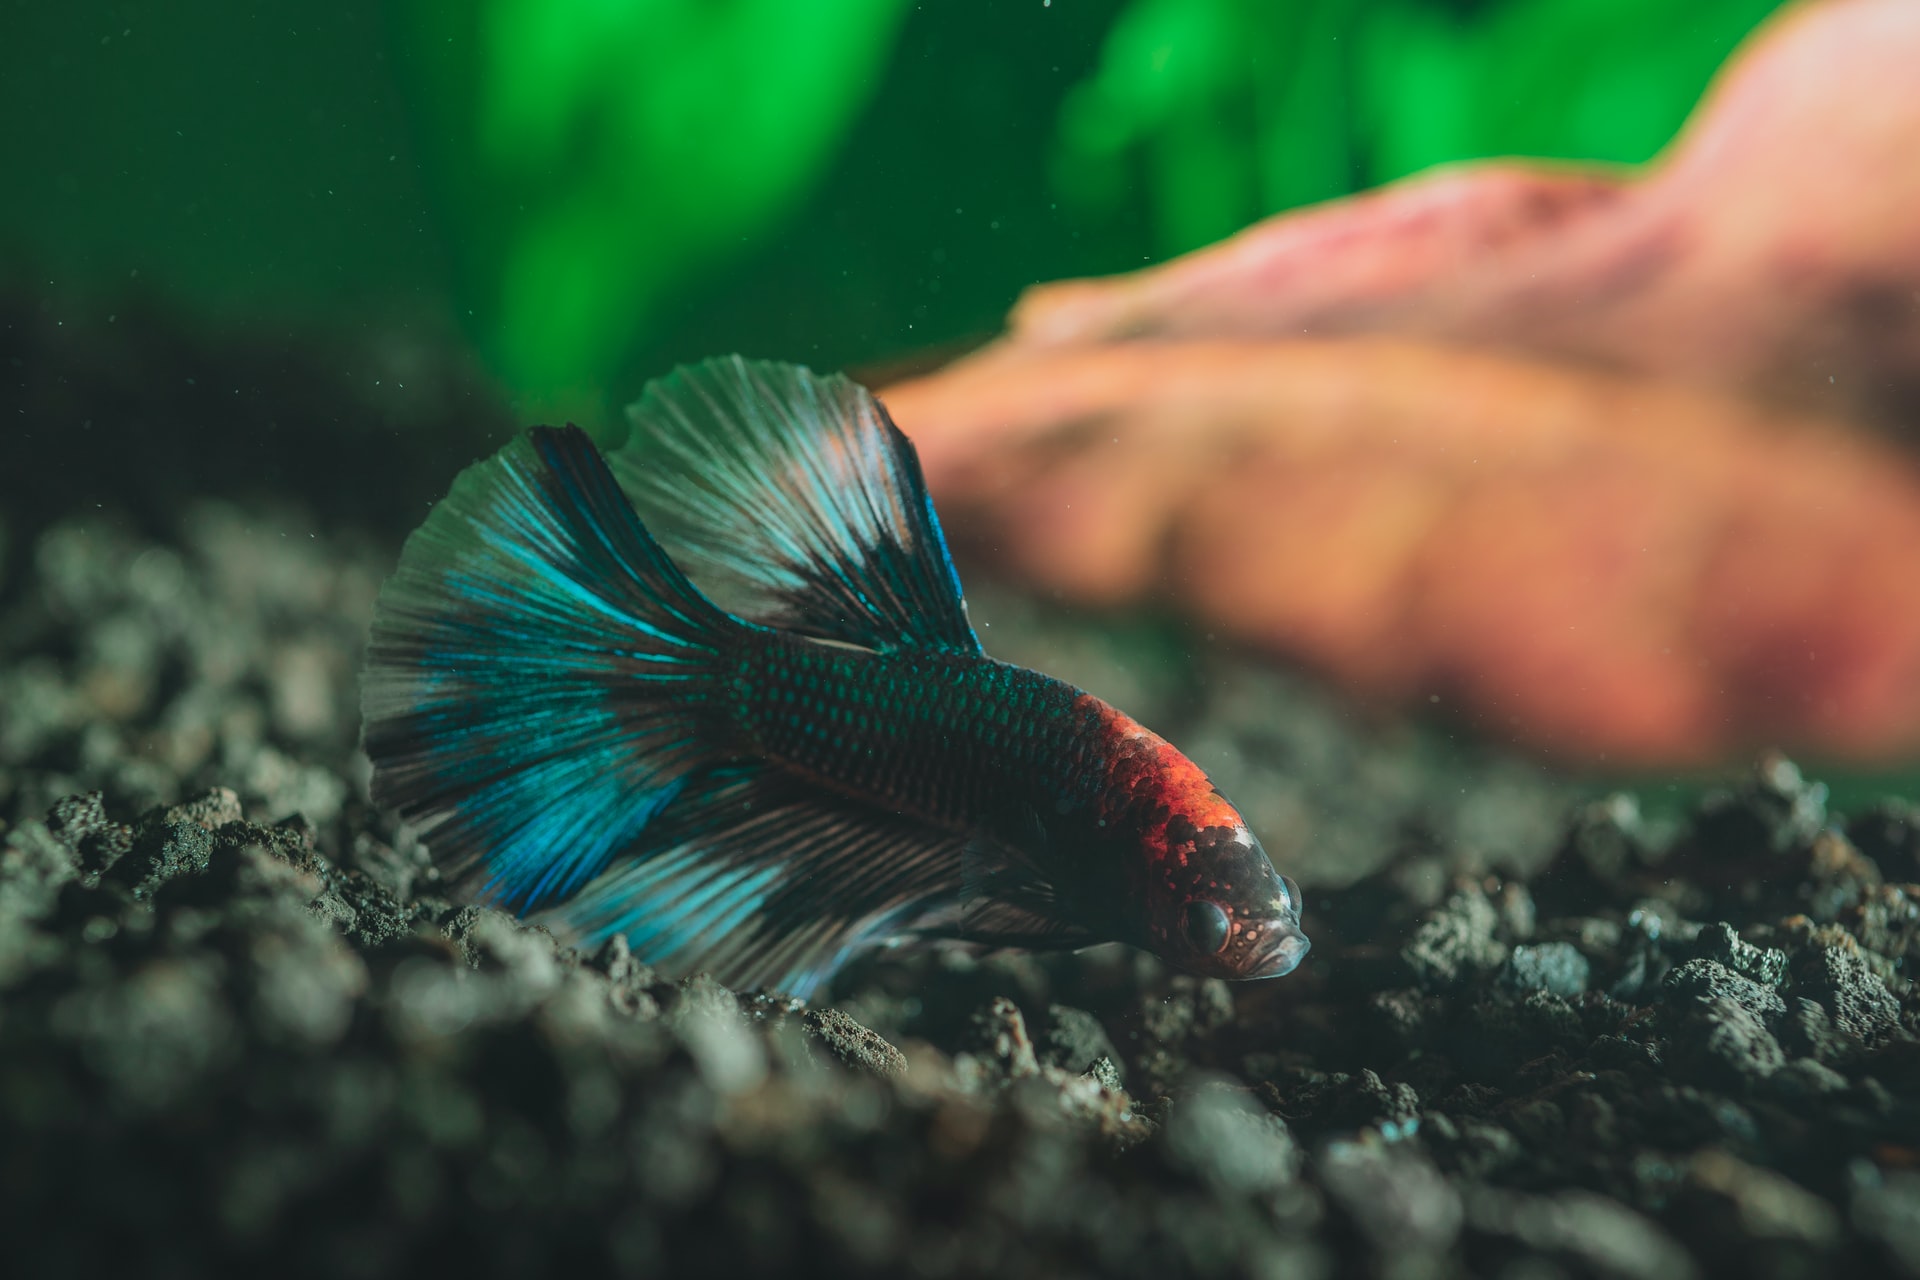 My Fish Is Not Moving! What Can I Do? - MyAquarium